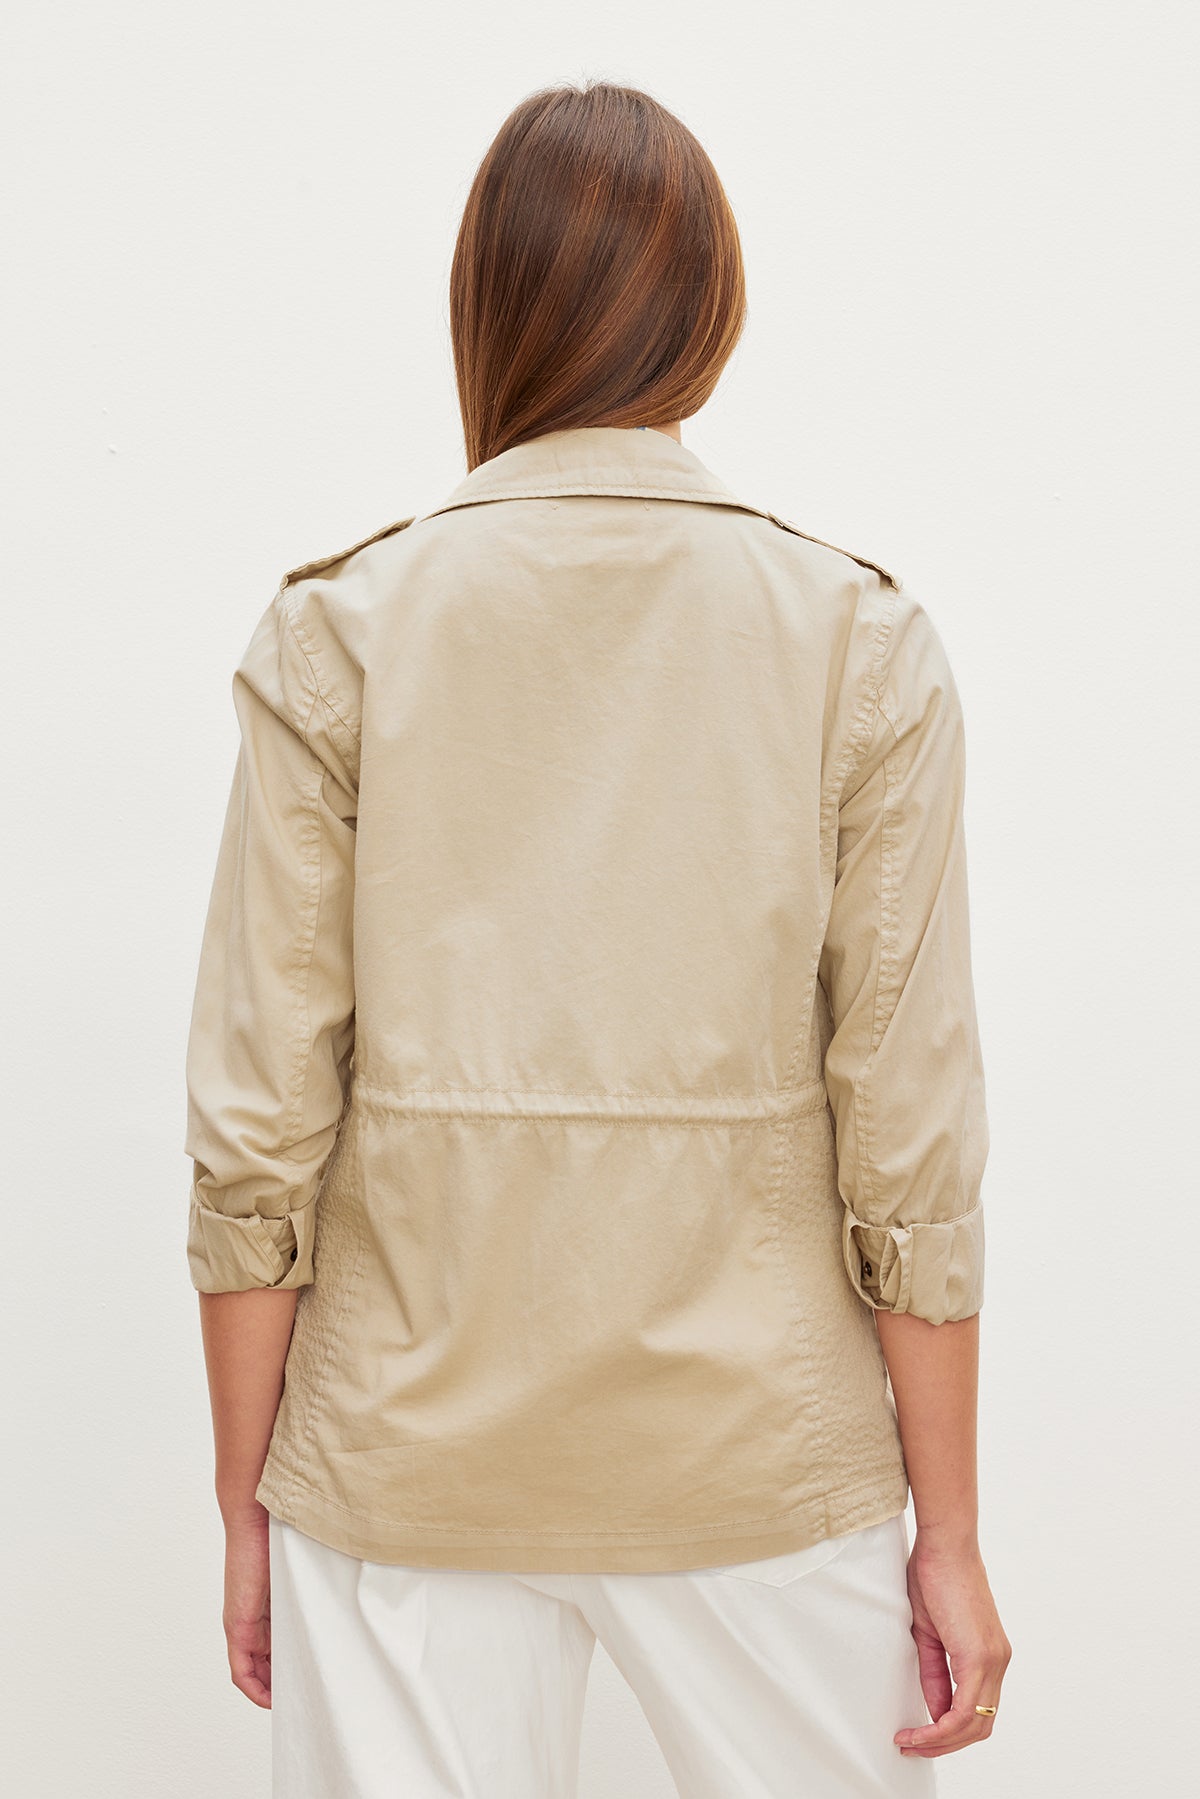 The back view of a woman wearing a RUBY LIGHT-WEIGHT ARMY JACKET made by Velvet by Graham & Spencer, showcasing its versatility.-35967534006465